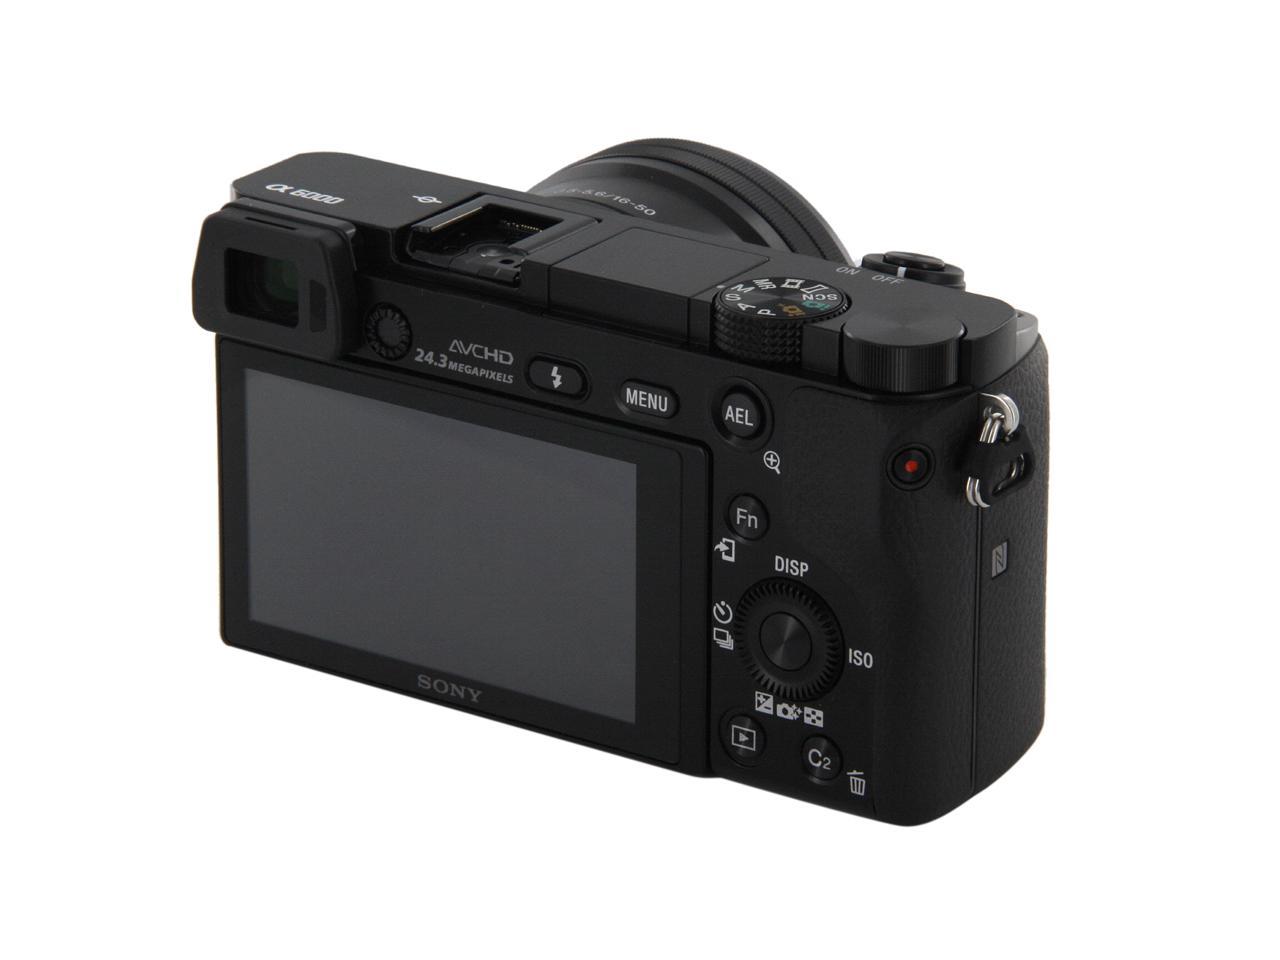 Sony Alpha A6000 ILCE-6000L/B Black Mirrorless Camera with 16-50 mm Lens